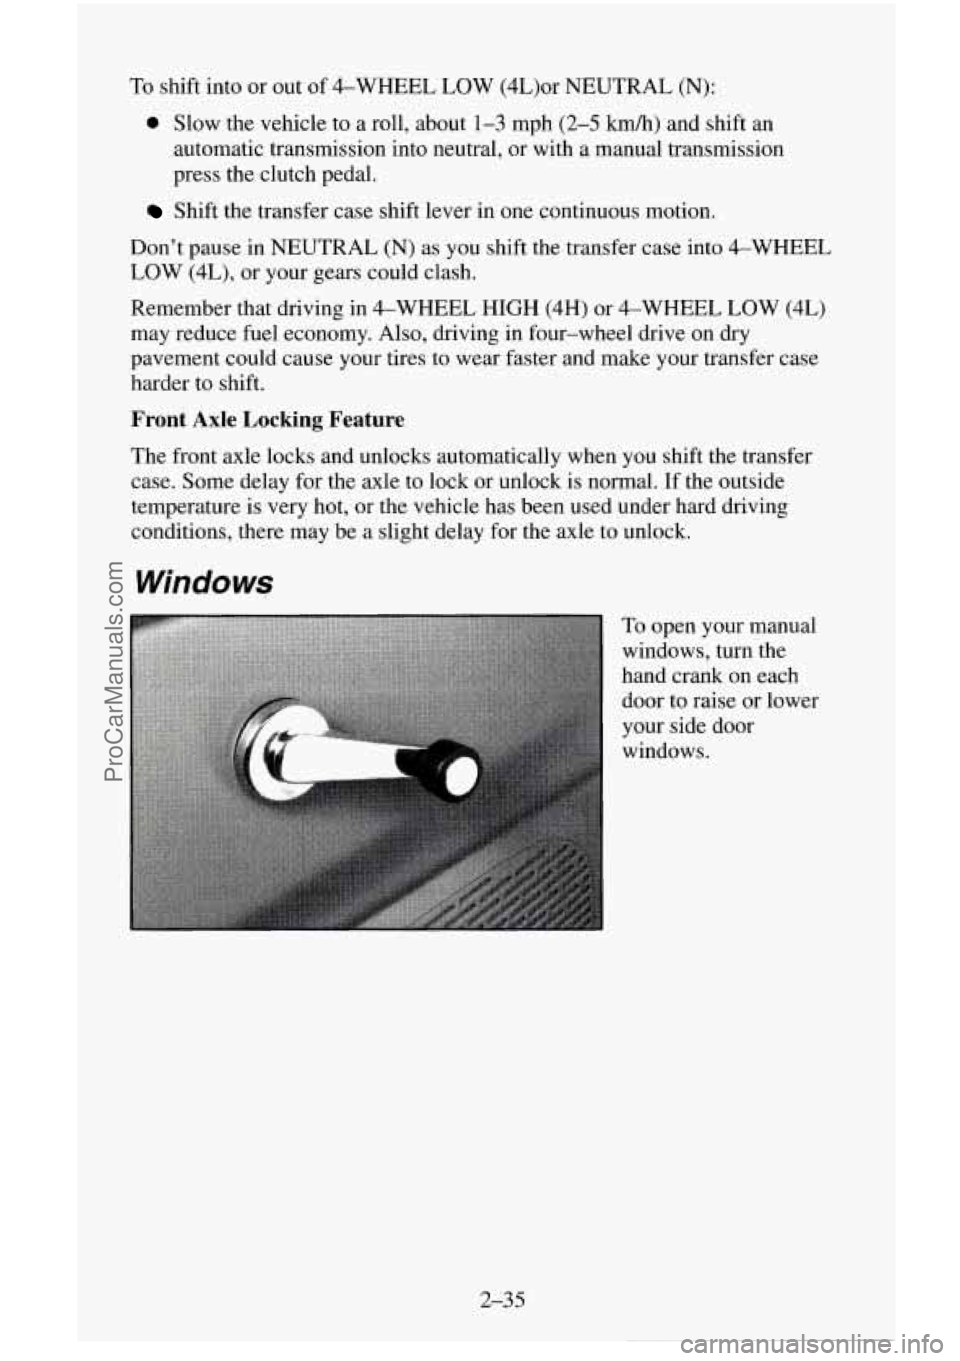 CHEVROLET SUBURBAN 1996  Owners Manual To shift  into  or  out of 4-WHEEL LOW  (4L)or  NEUTRAL  (N): 
0 Slow the vehicle  to  a roll, about 1-3 mph (2-5 kdh) and shift  an 
automatic  transmission  into neutral,  or with a manual transmiss